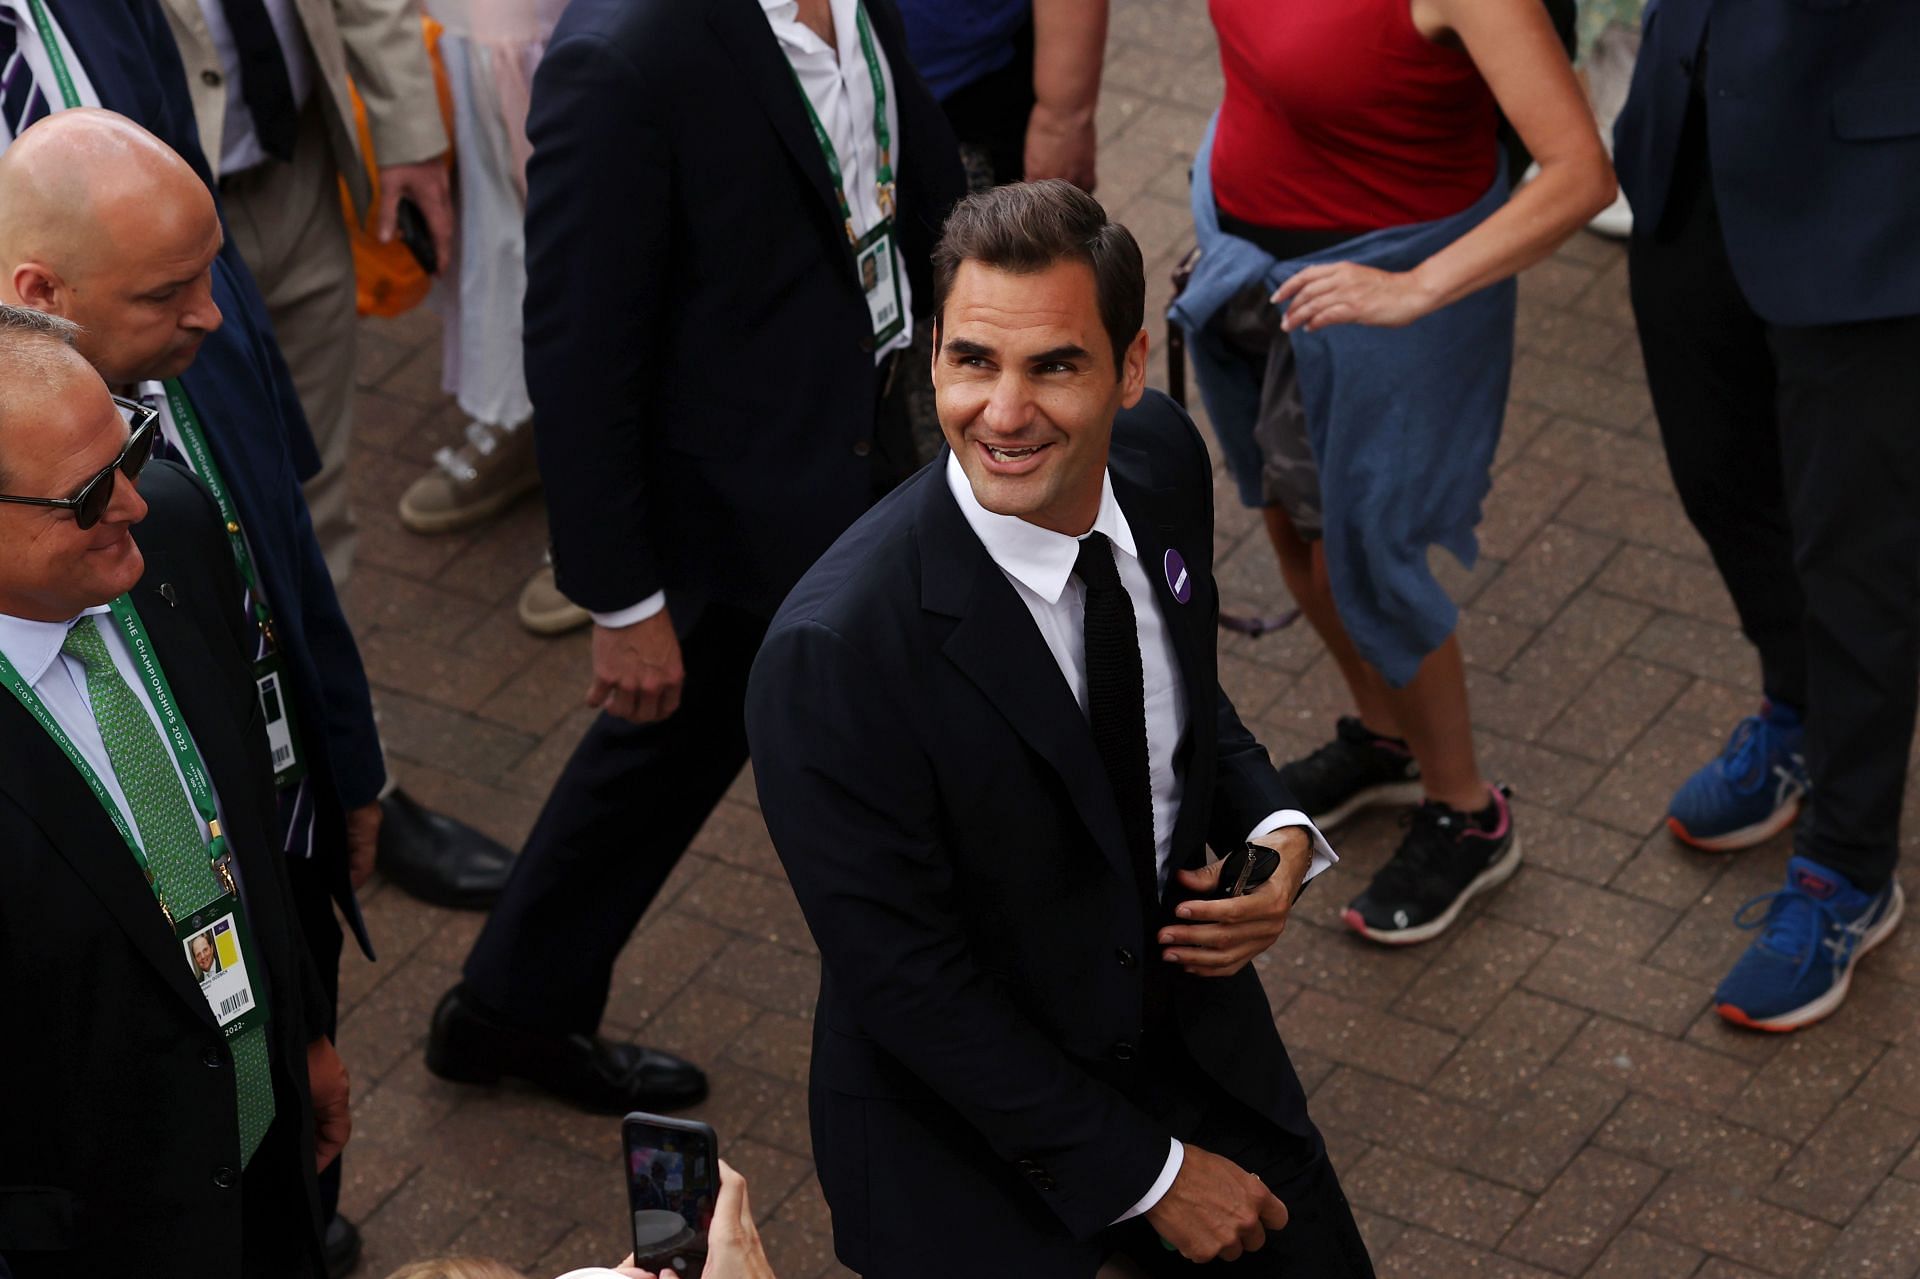 Roger Federer smiles during his visit to Wimbledon for the 2022 championships.